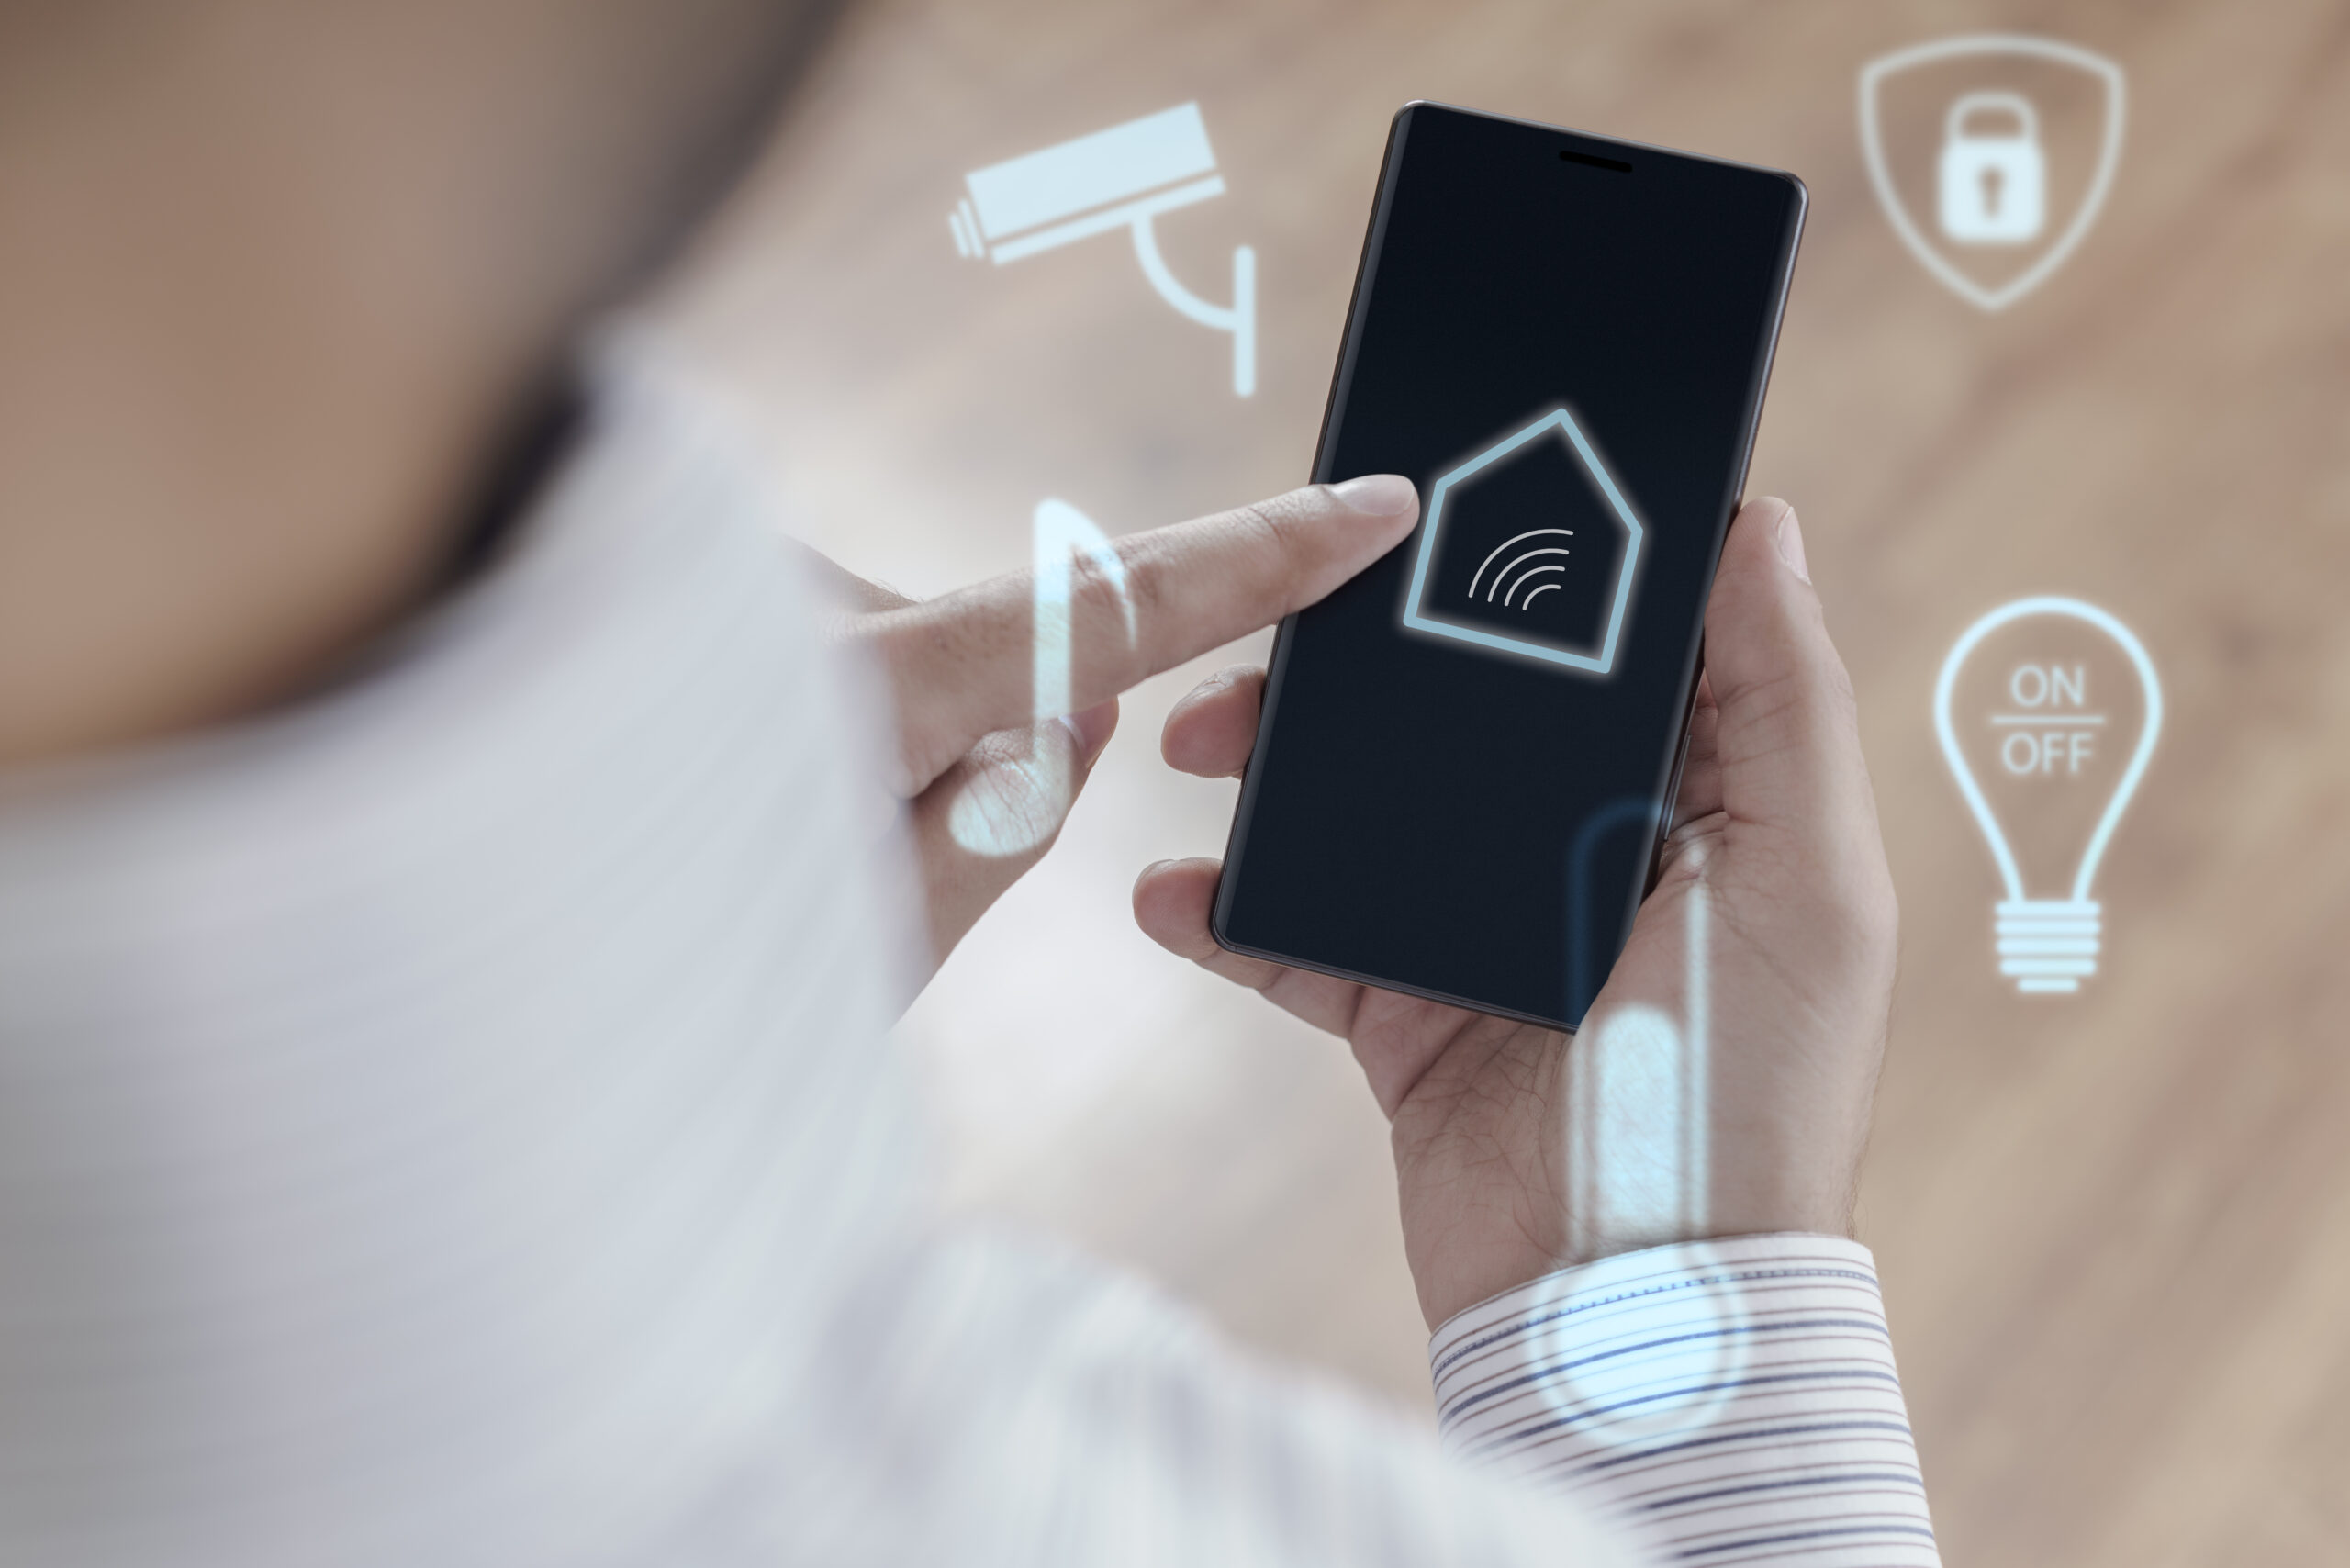 Man using smartphone to control Smart home - Smart house concept